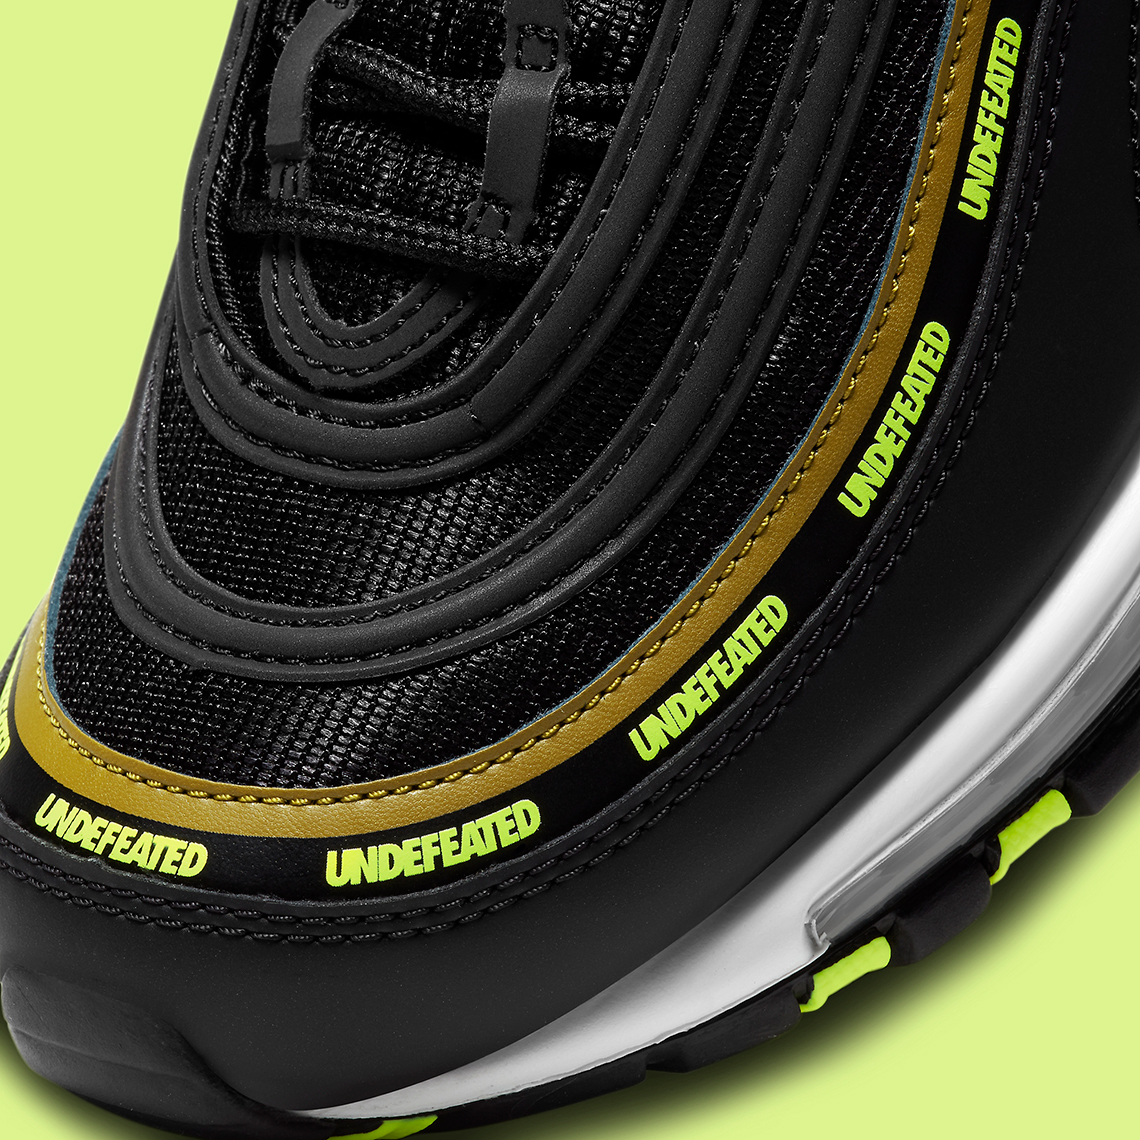 Undefeated Nike Air Max 97 Dc4830 001 3